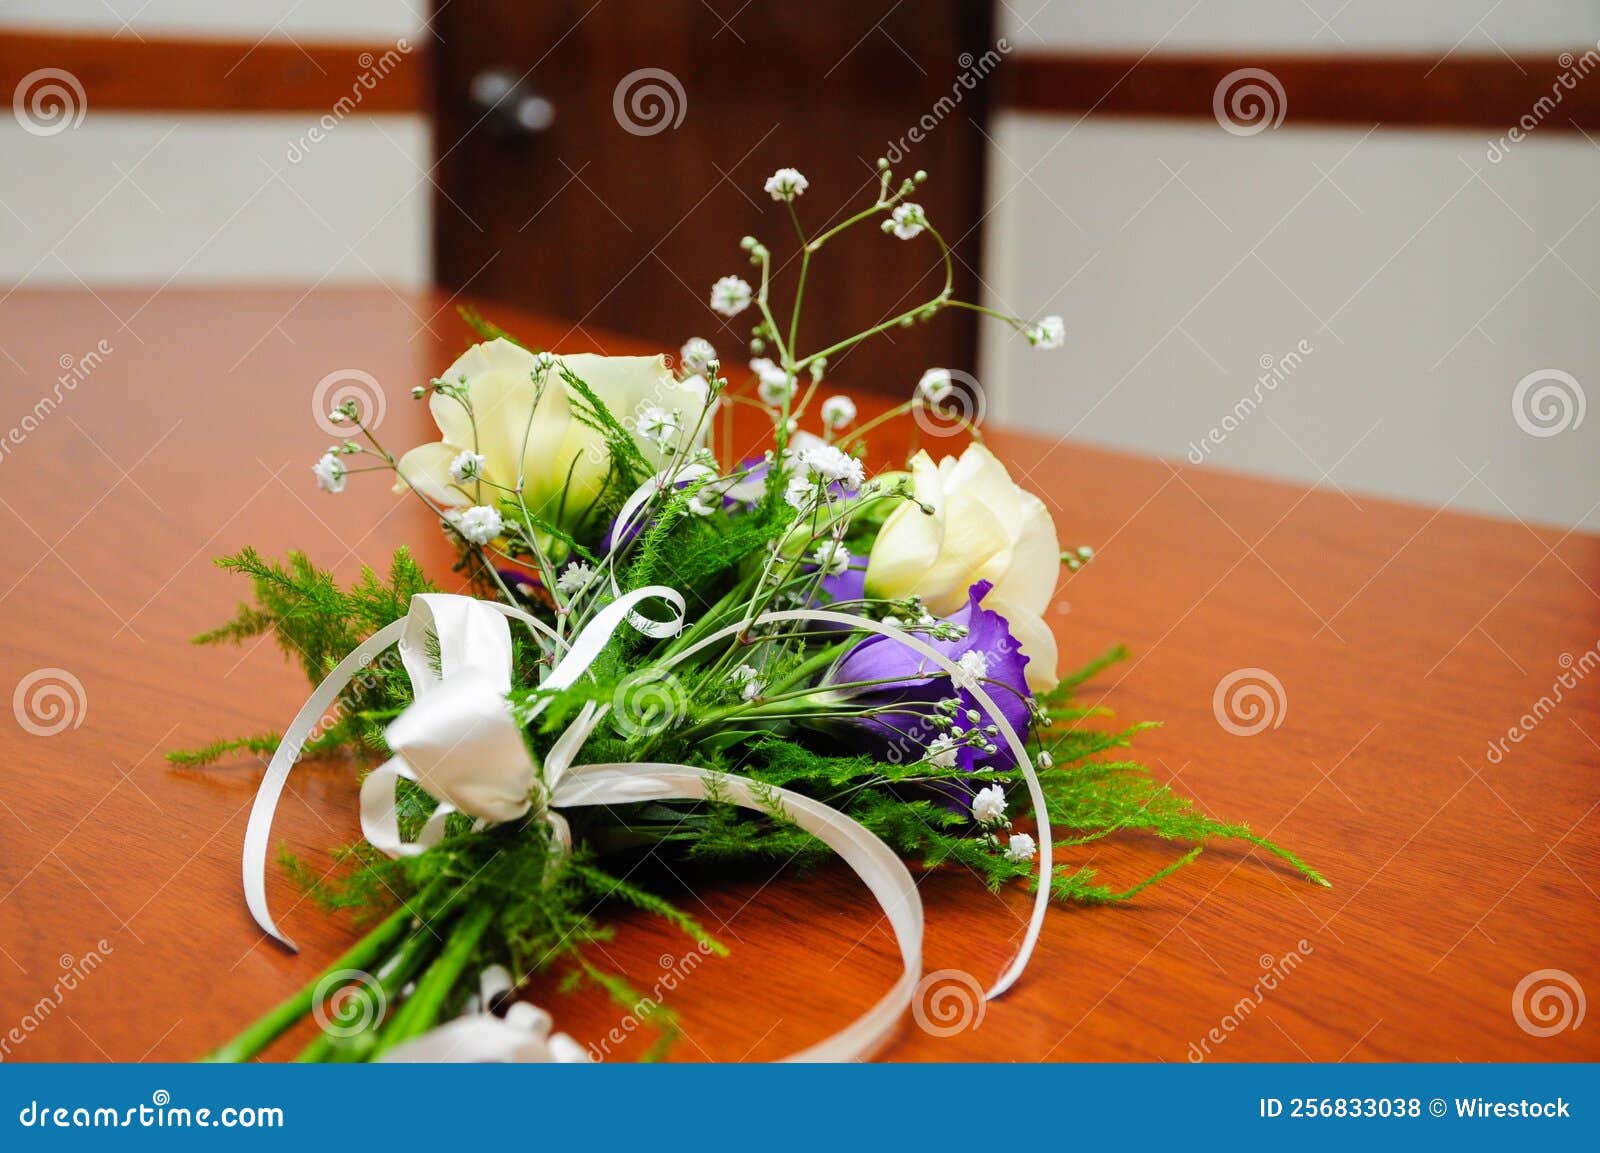 flowers that a bride was holding during her engagement ceremony.